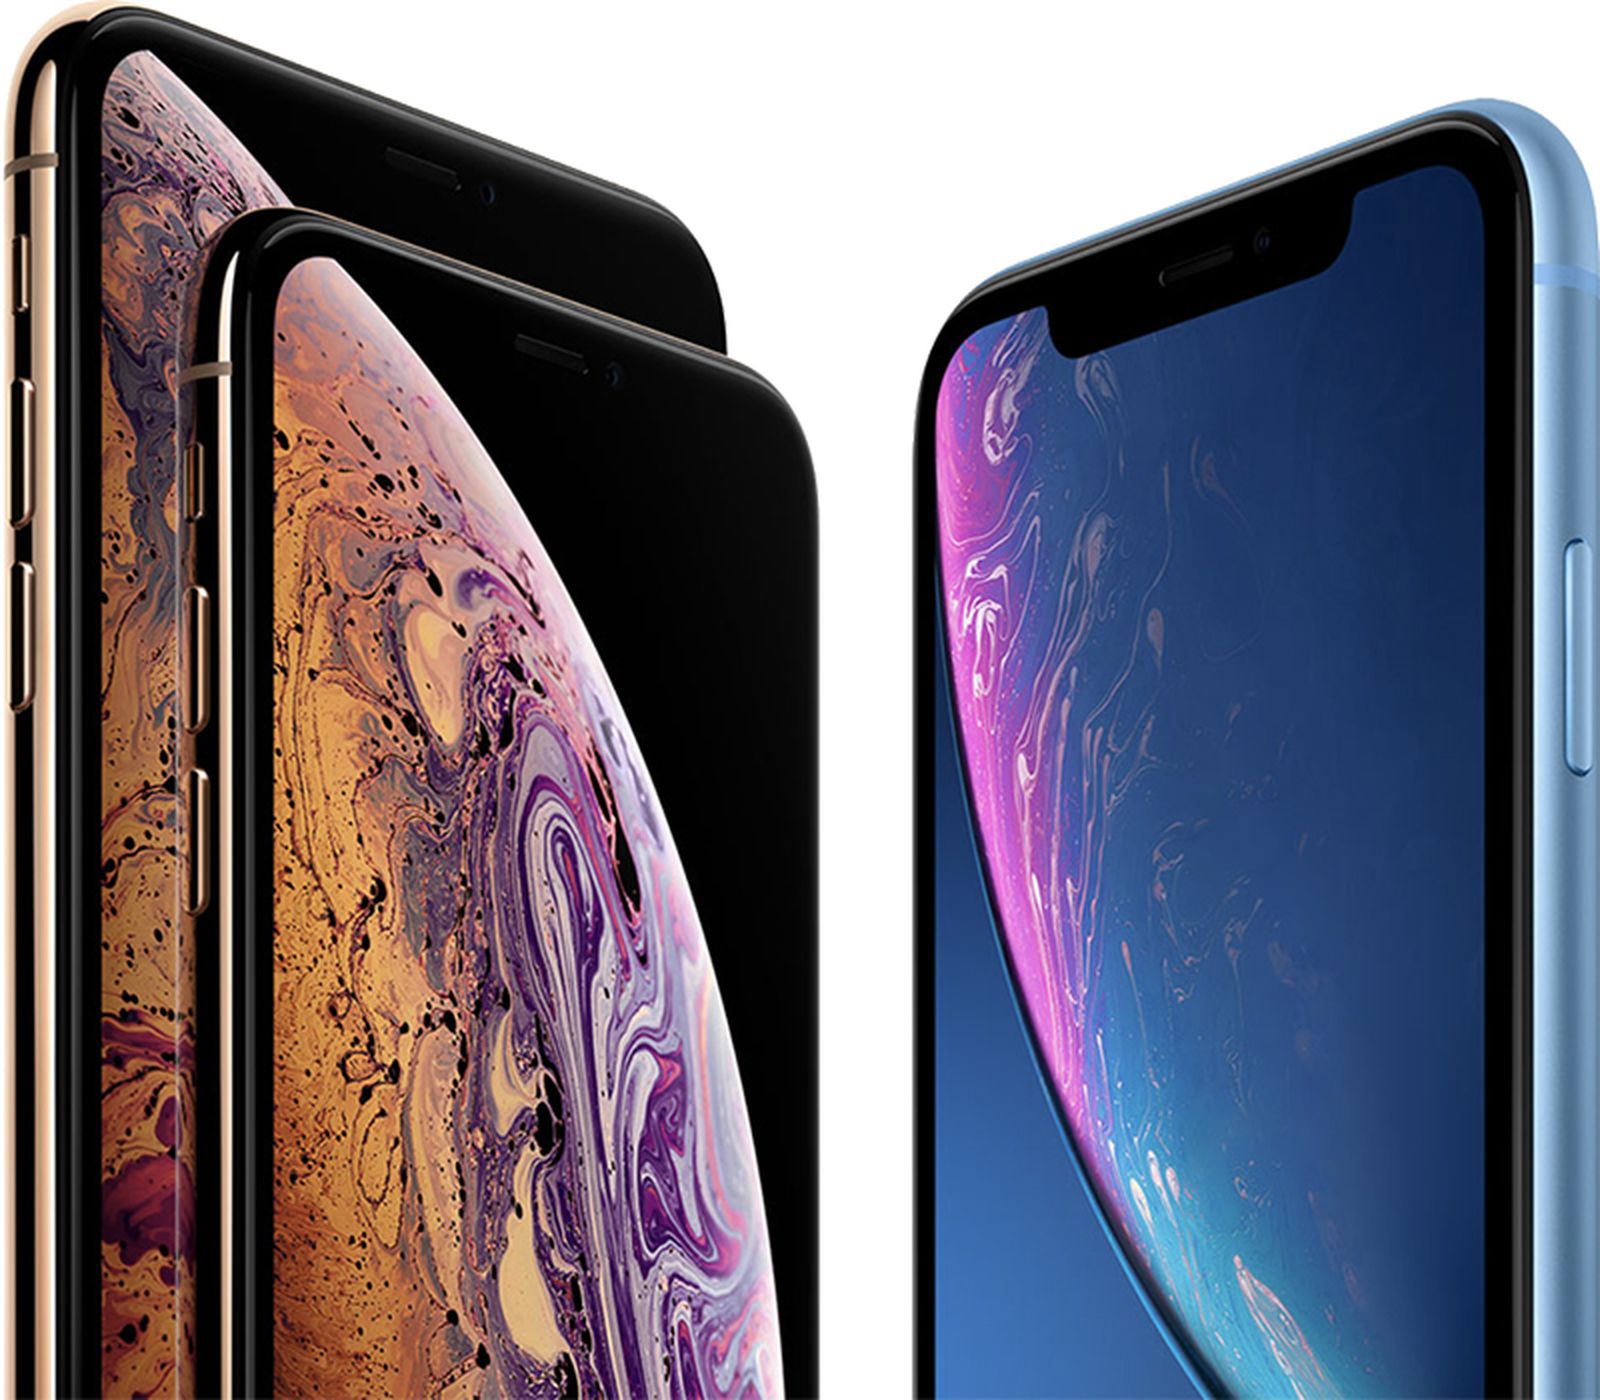 How Much RAM Does The IPhone XS Have